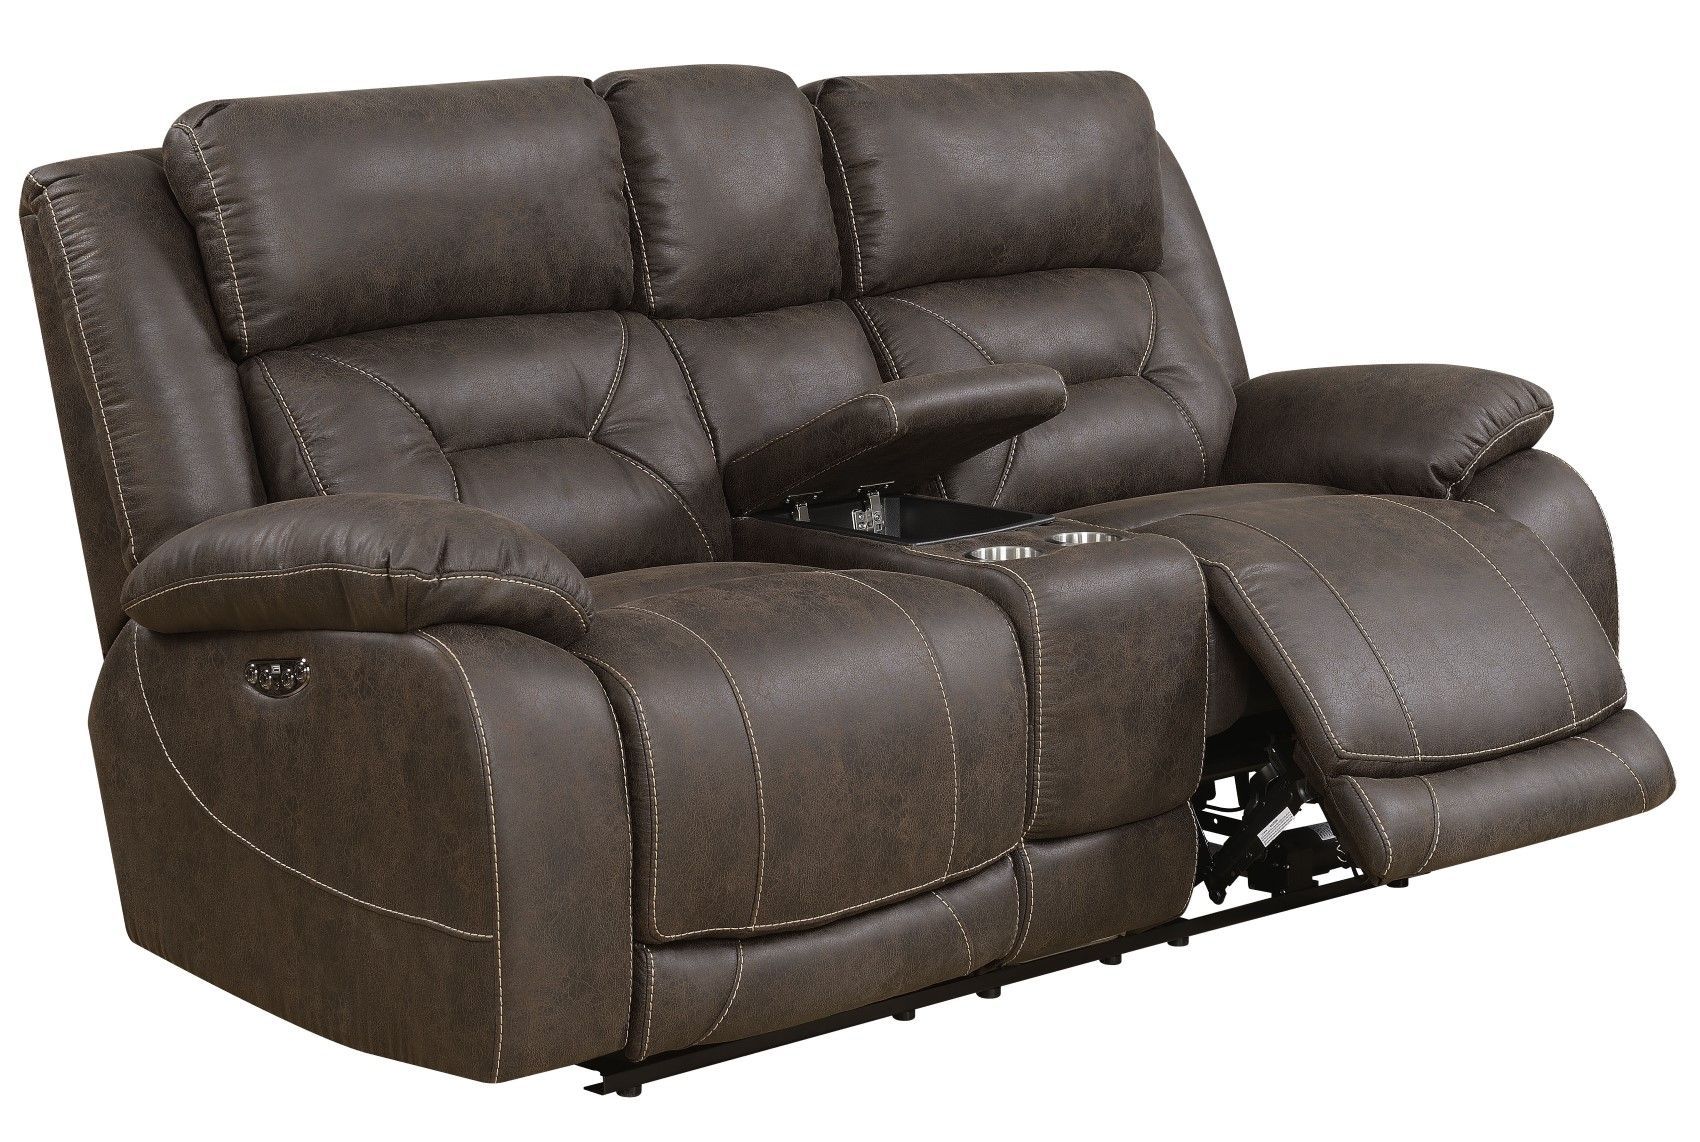 Aria Power Recliner Sofa Set With Power Head Rest In Throughout Expedition Brown Power Reclining Sofas (View 2 of 15)